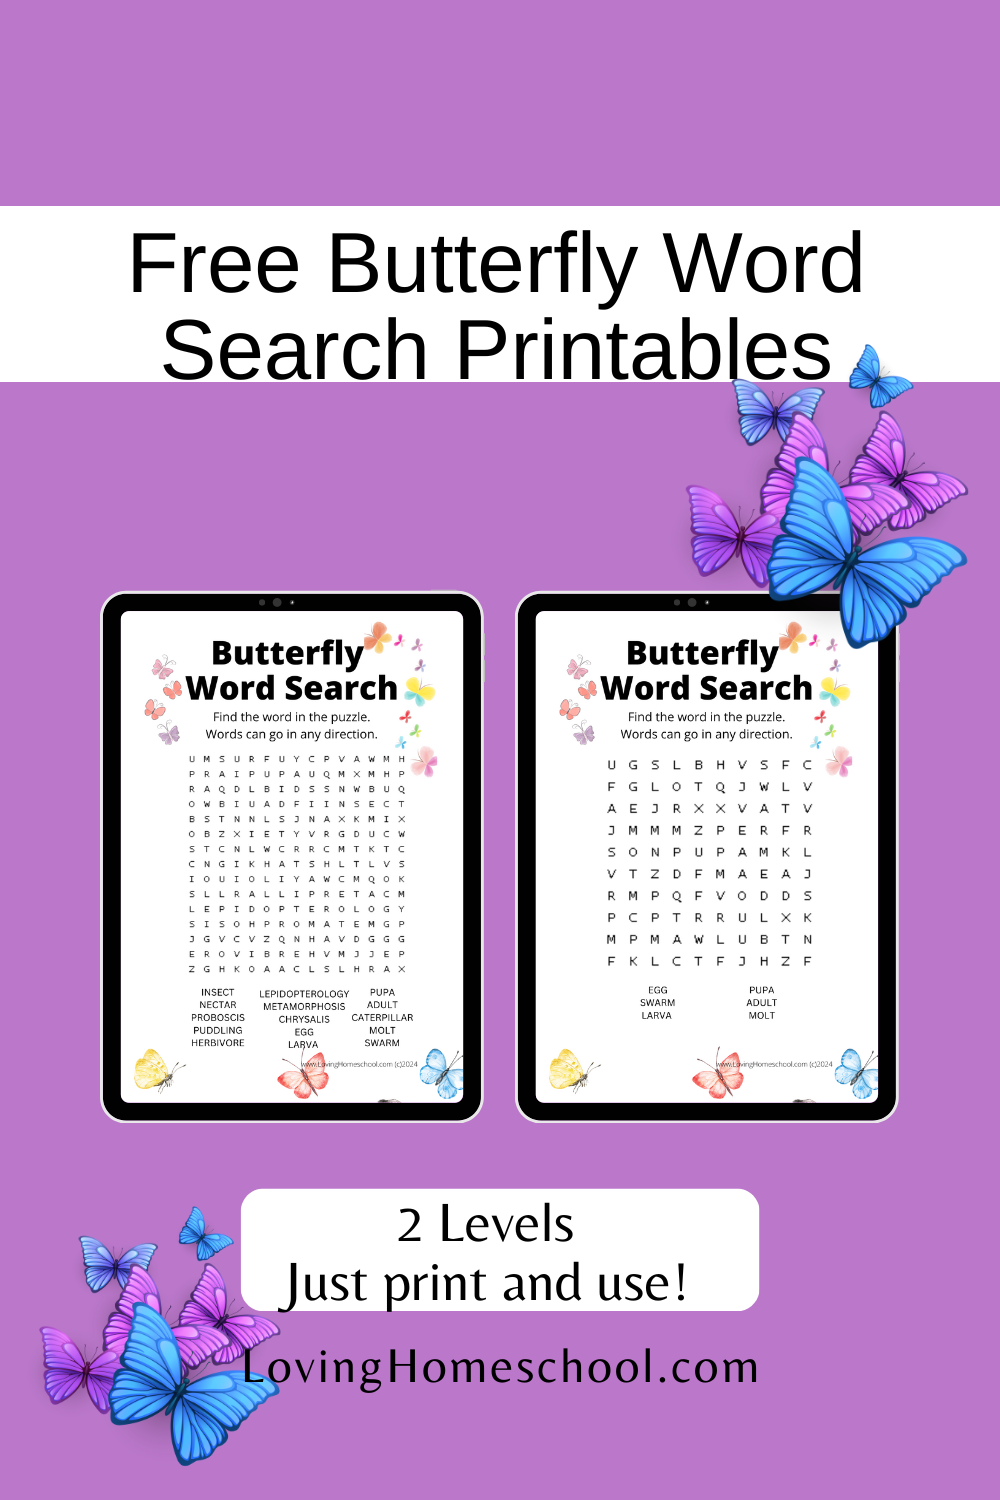 Butterfly Word Search Printables Pinterest Pin